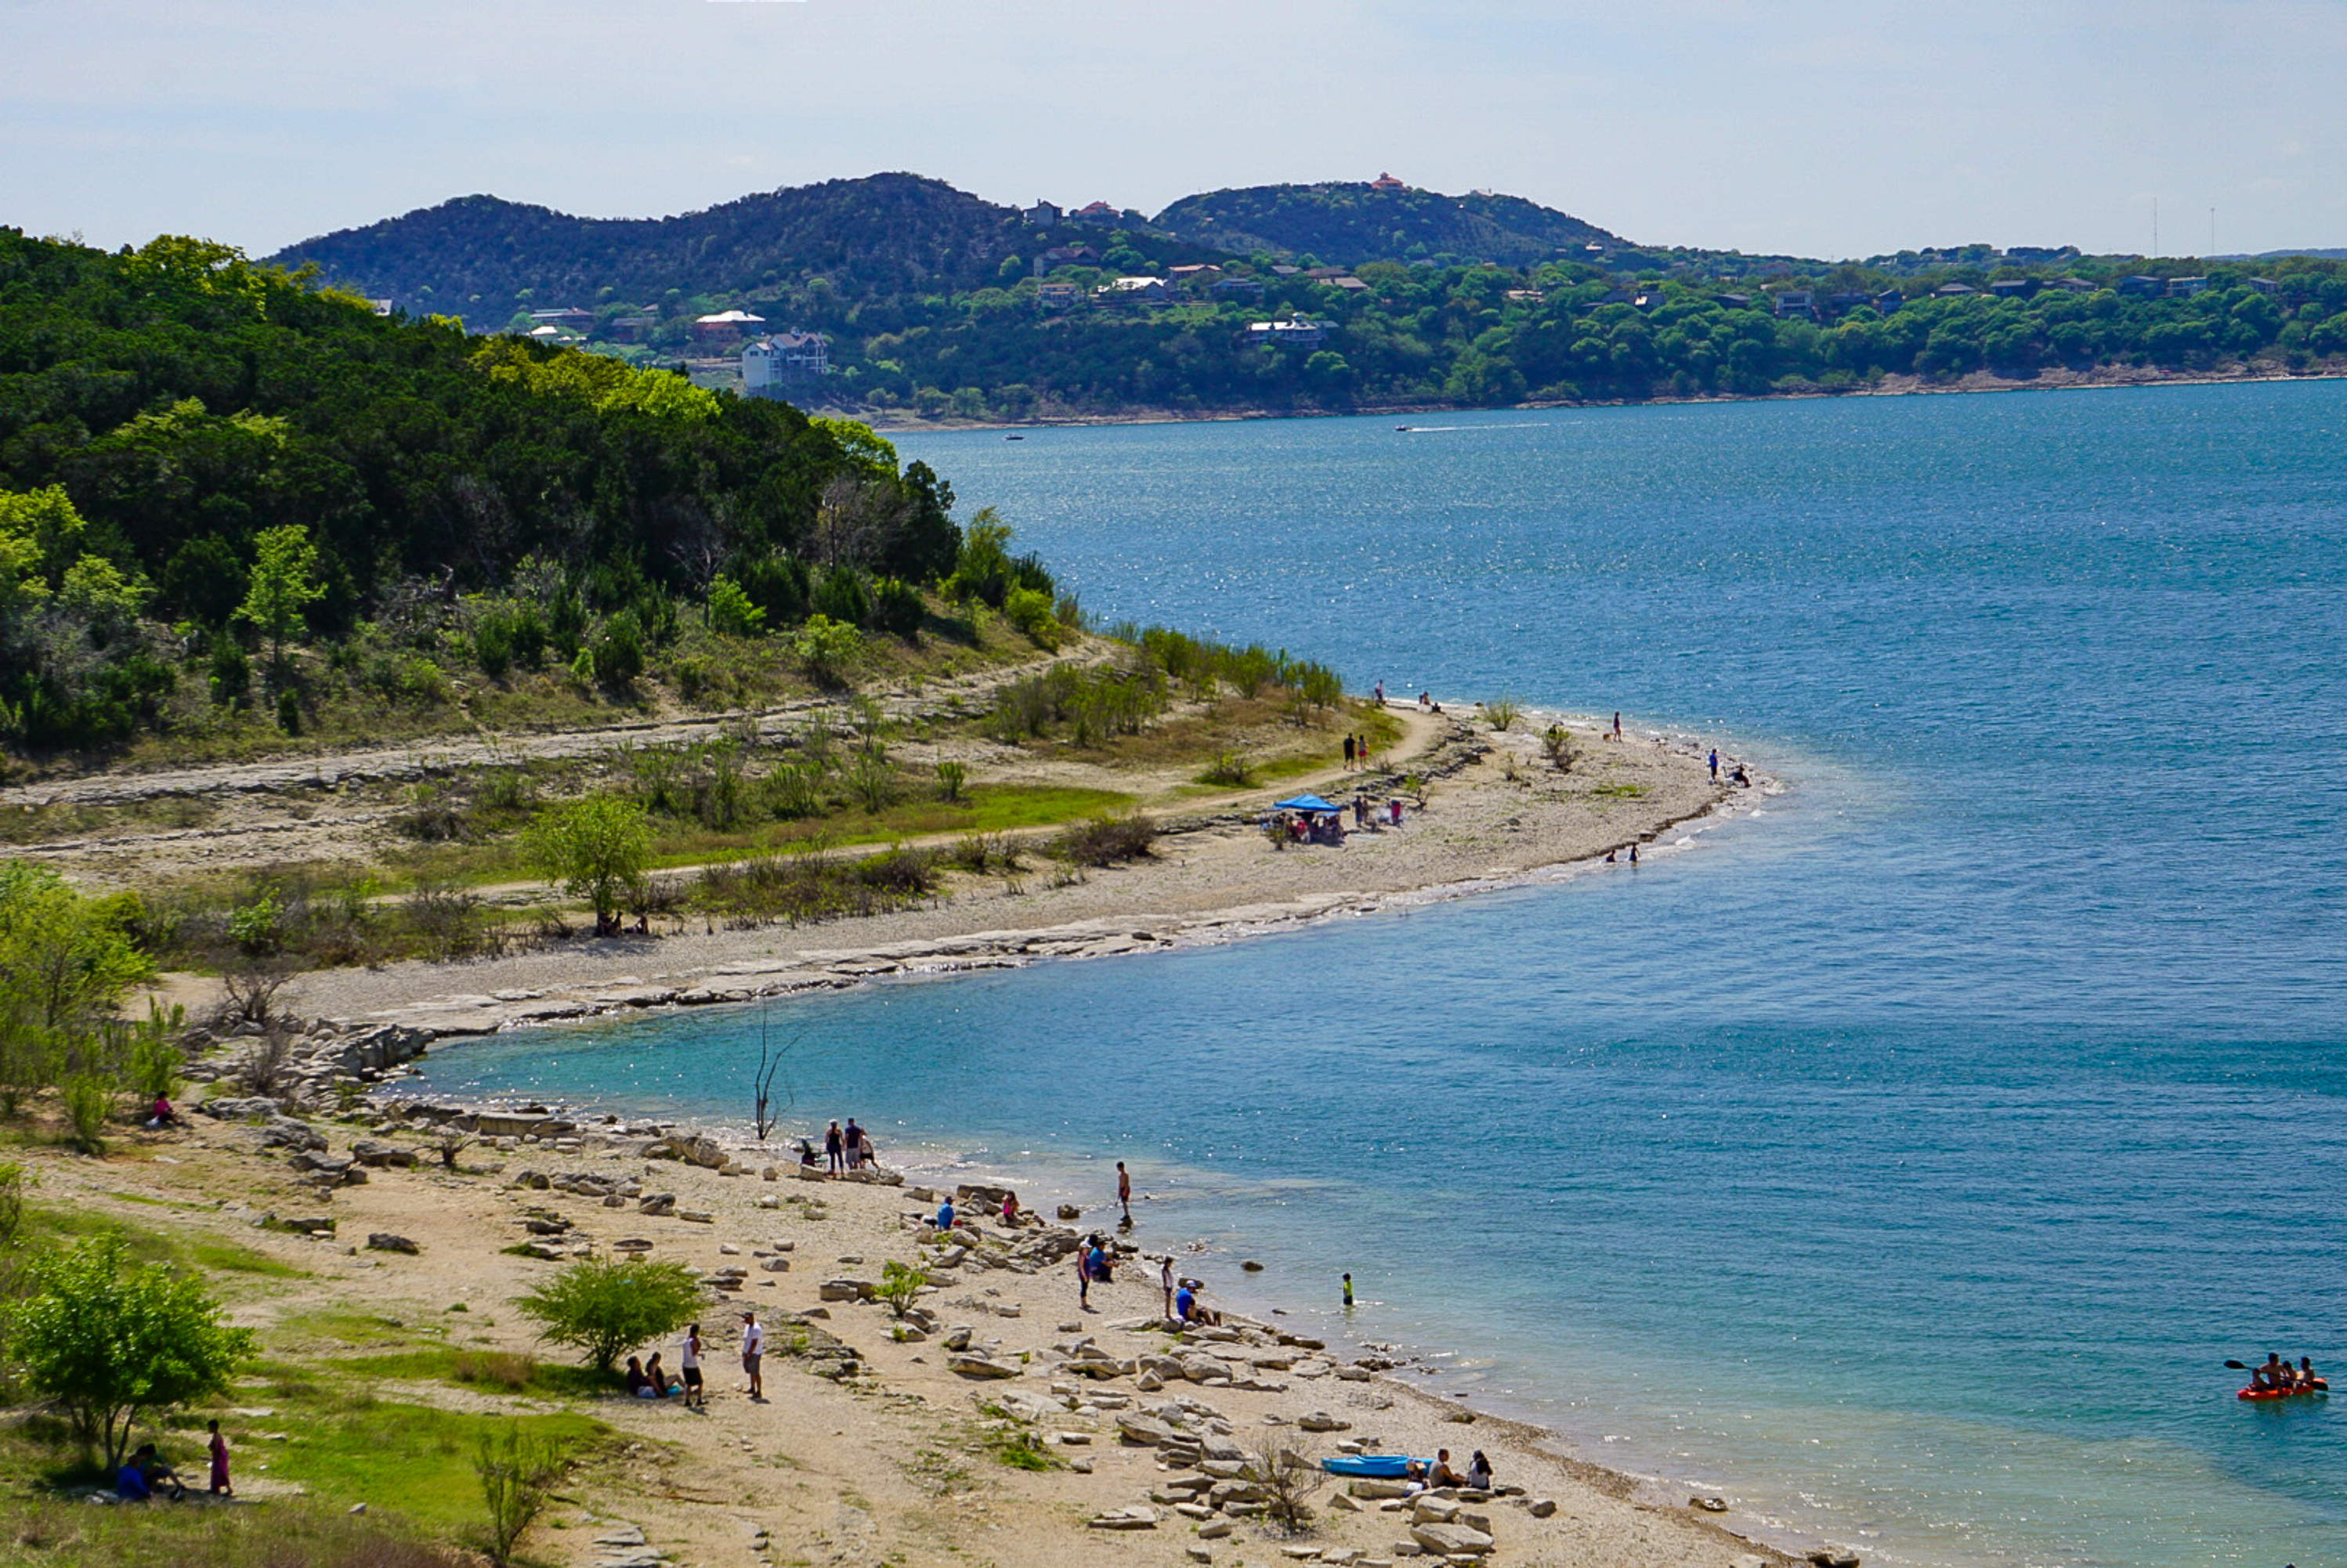 Shoreline of a lake with beachgoers on the sand.